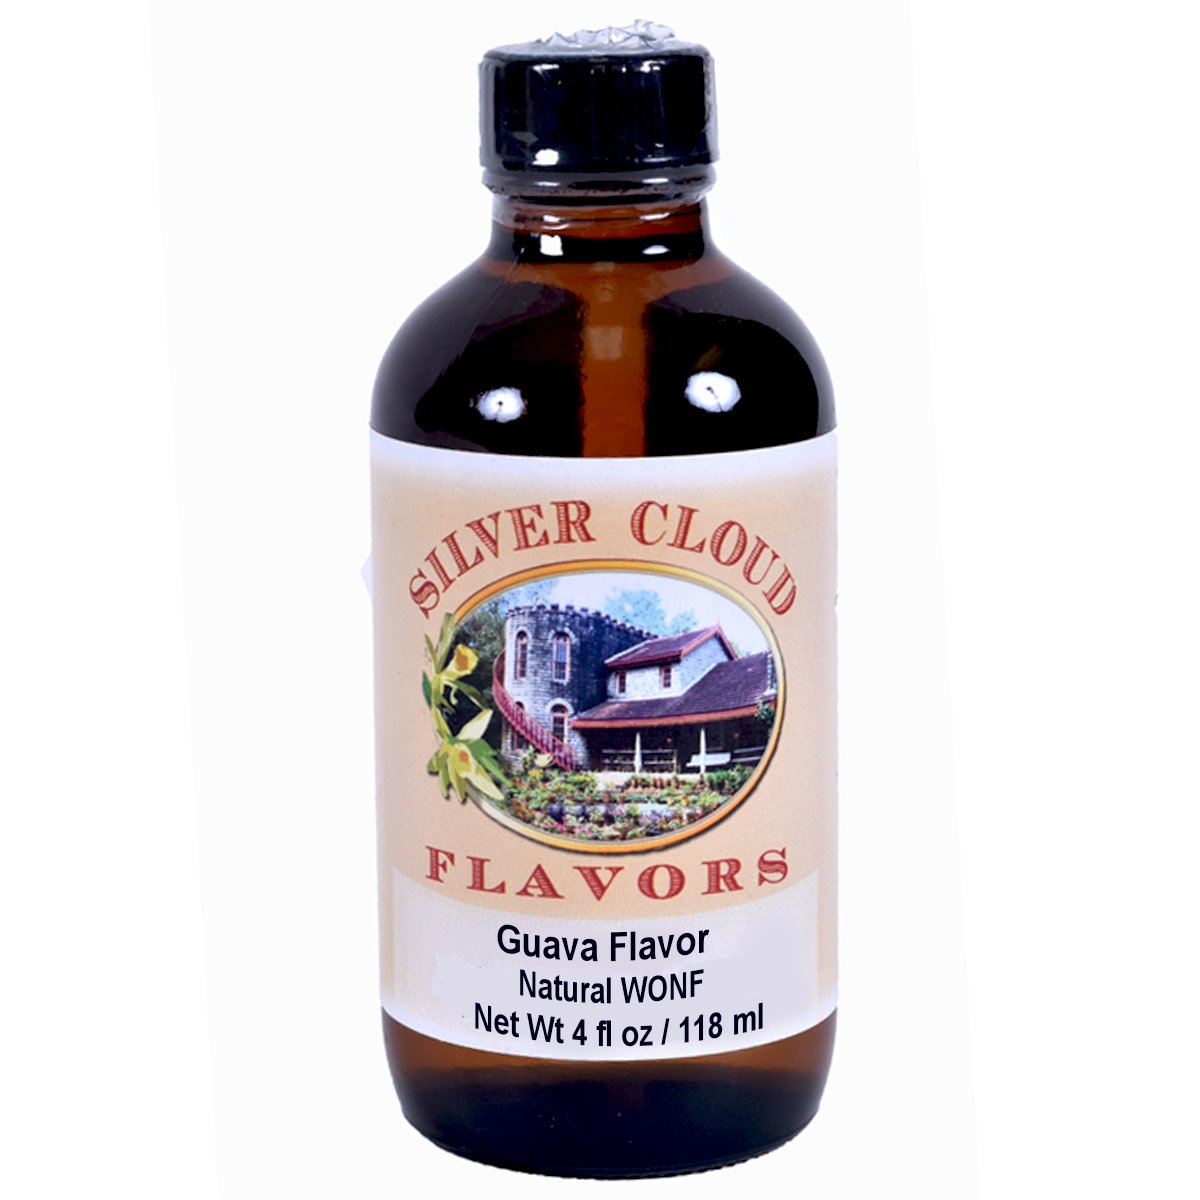 Guava Flavor, Natural WONF Silver Cloud Extract - Bake Supply Plus